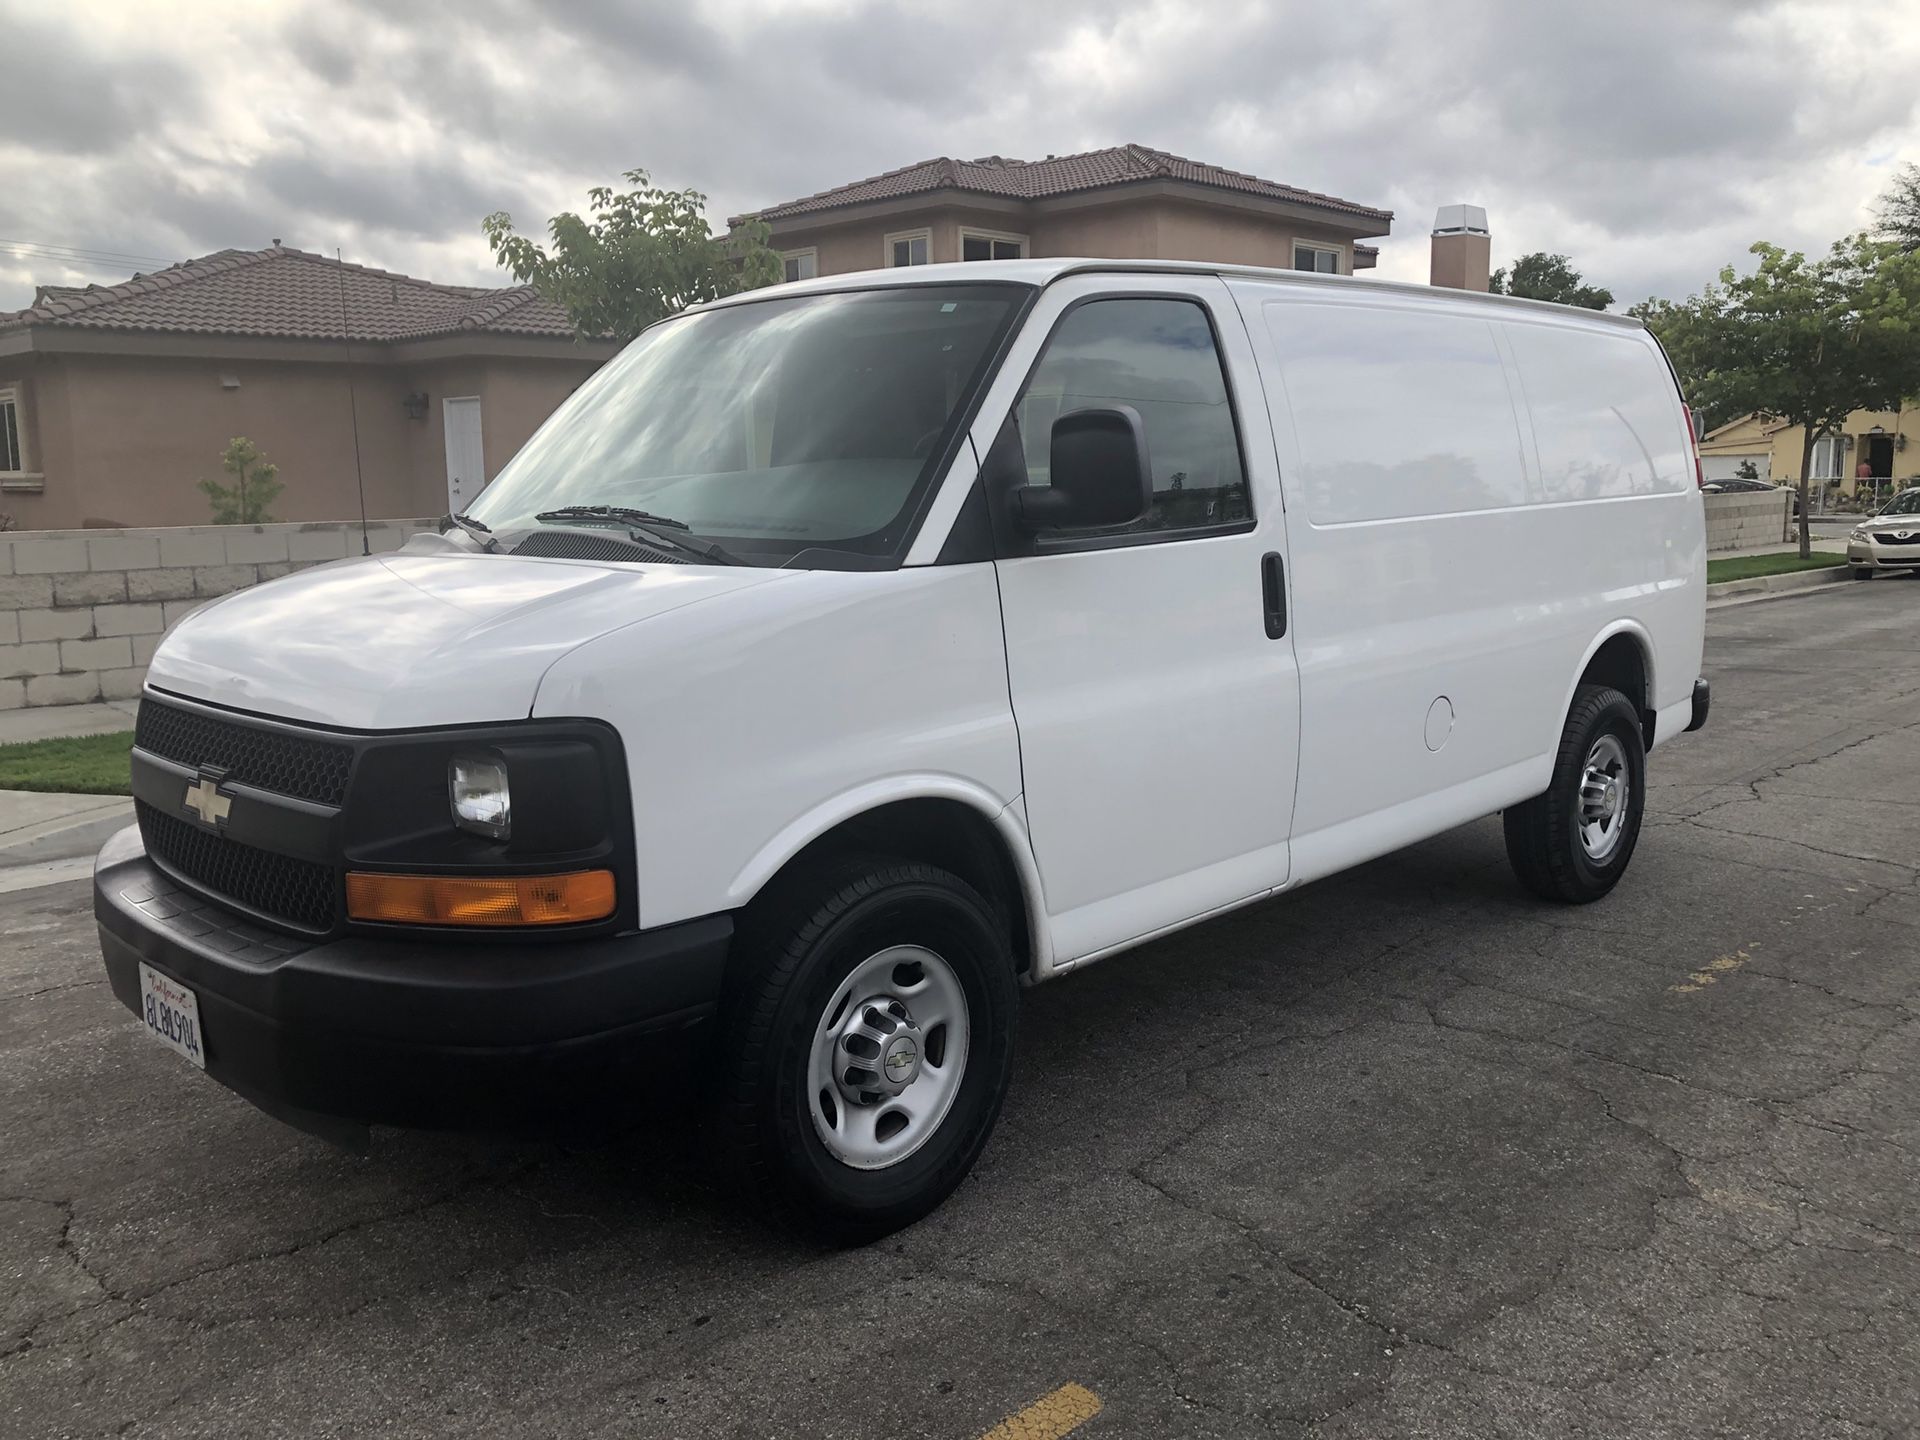 2010 Chevy Cargo Van - Excellent Condition- Clean title - Smogged- MUST SEE